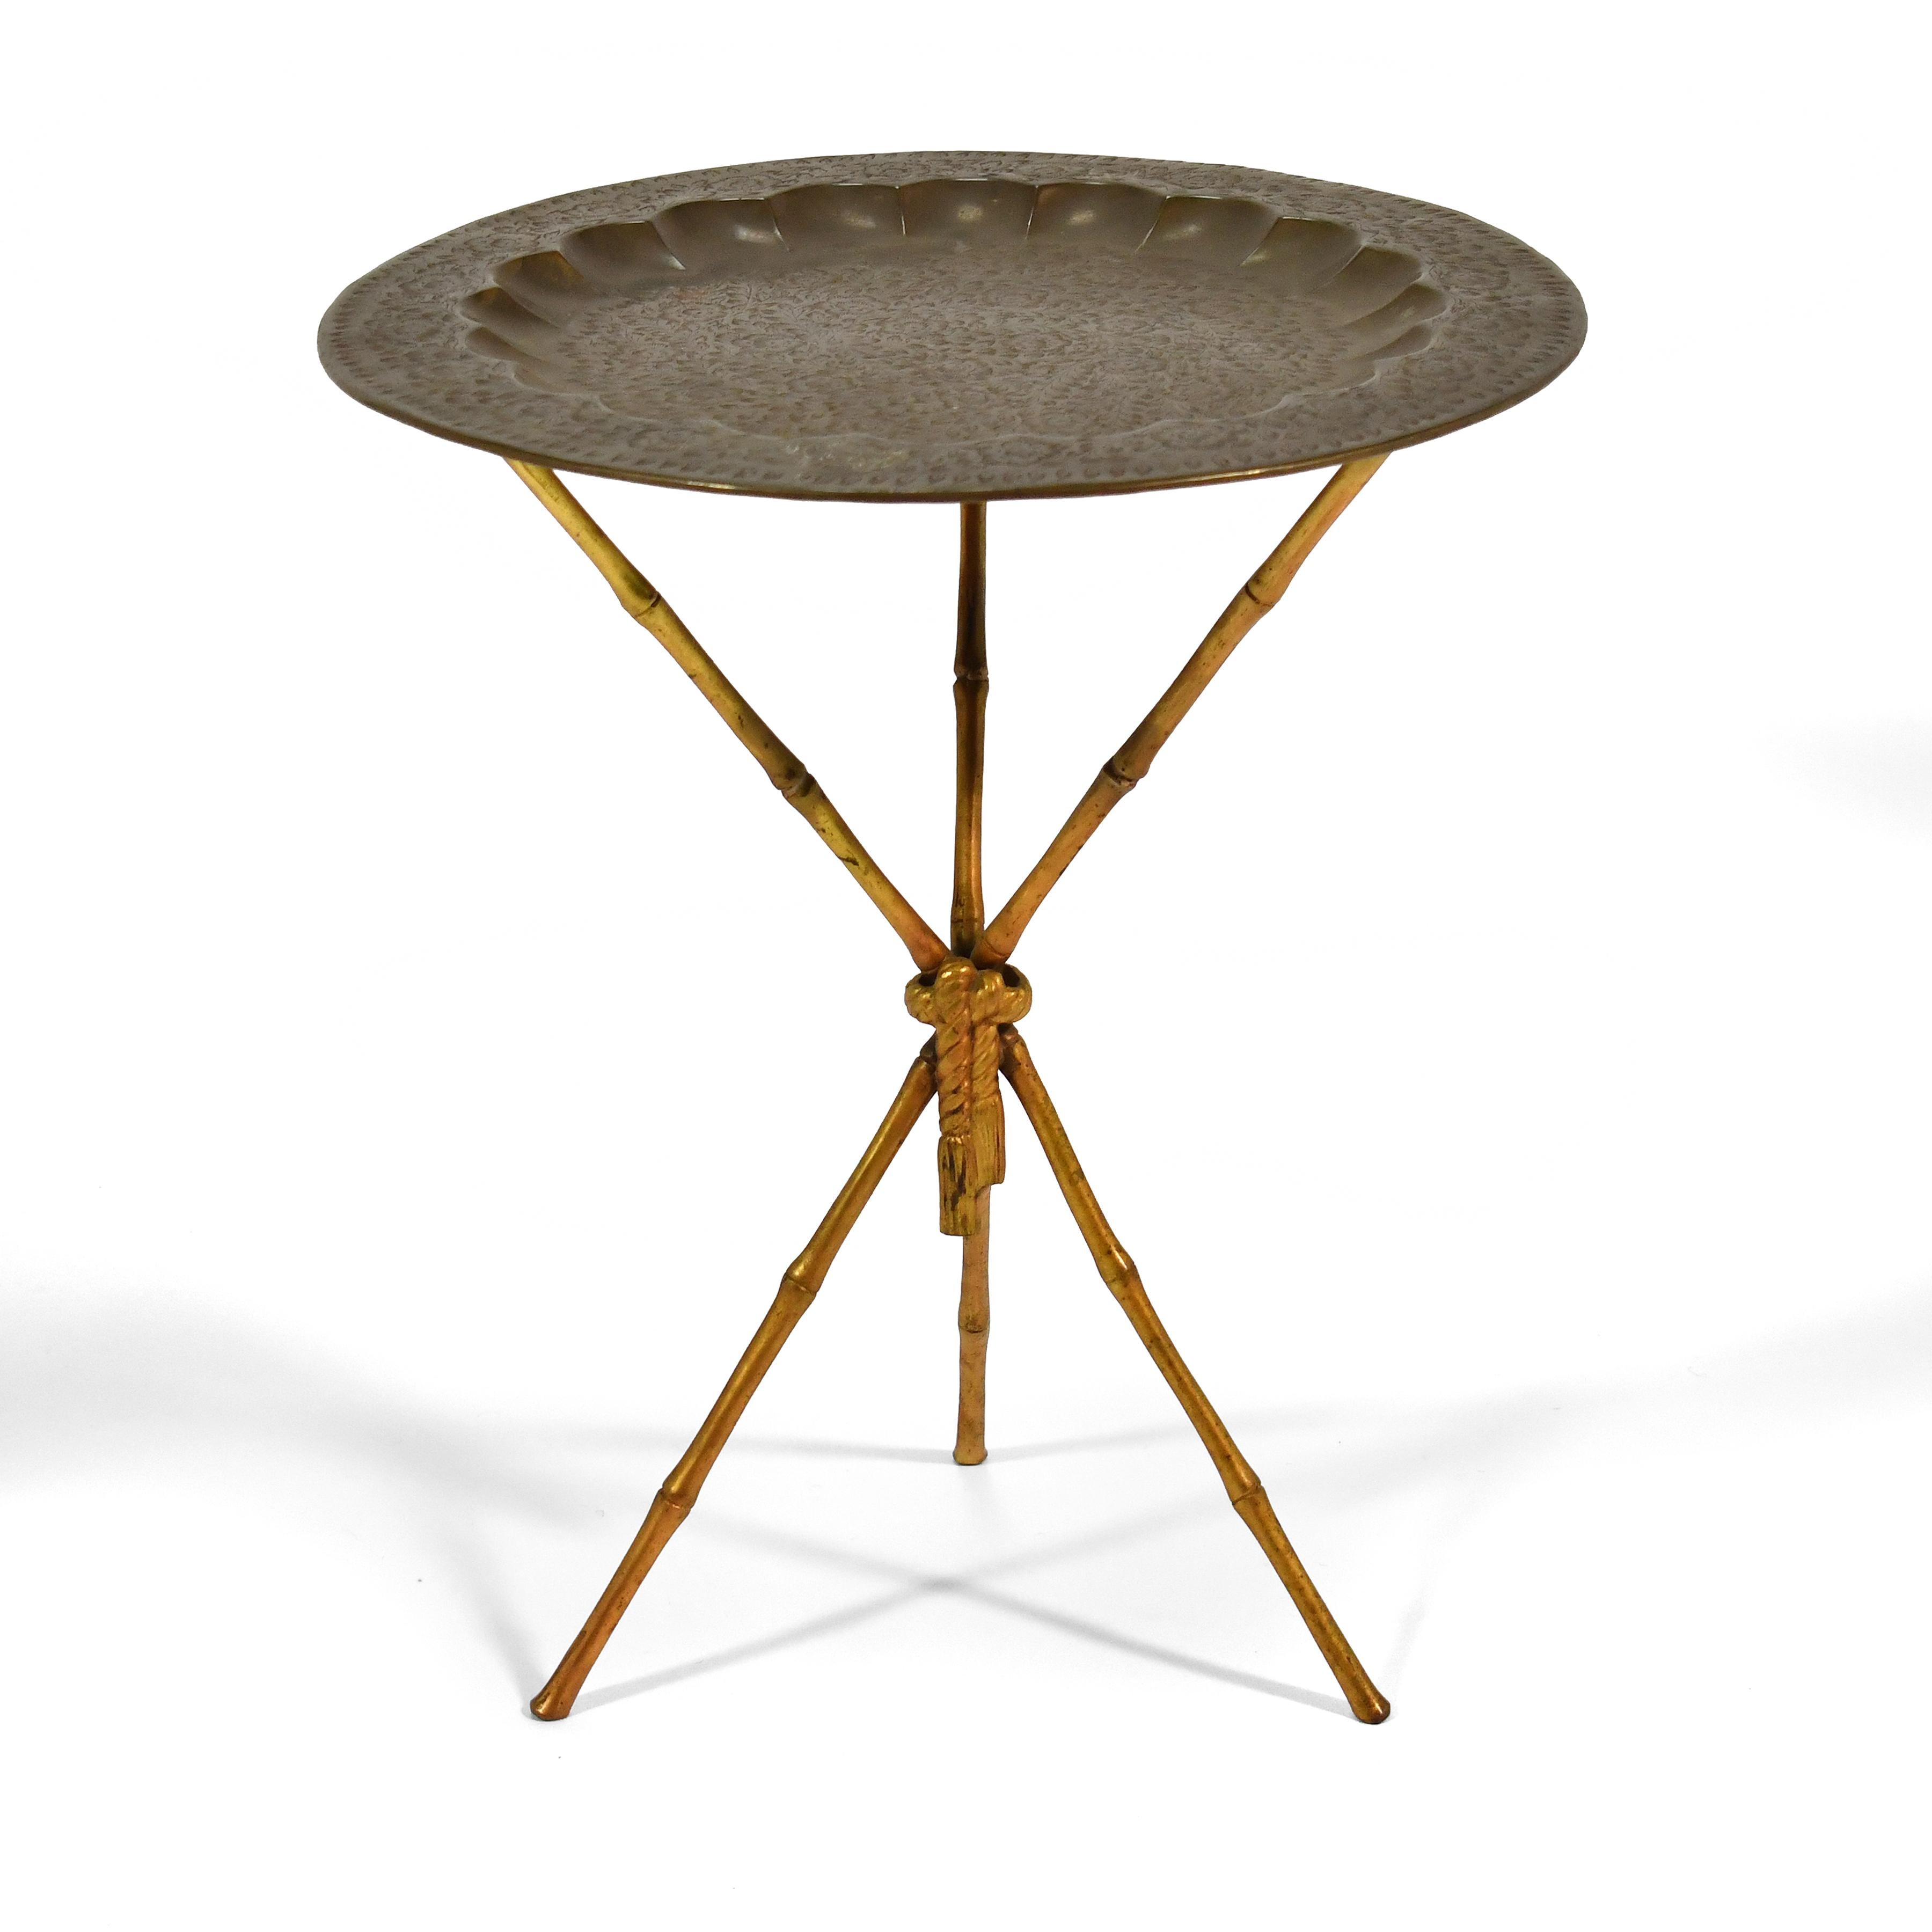 This slender, light, side or end table has a faux bamboo tripod base in the manner of Arthur Court made of either brass, or aluminum with a gold finish. It can support a glass top, but we acquired it from the original owner with this vintage etched